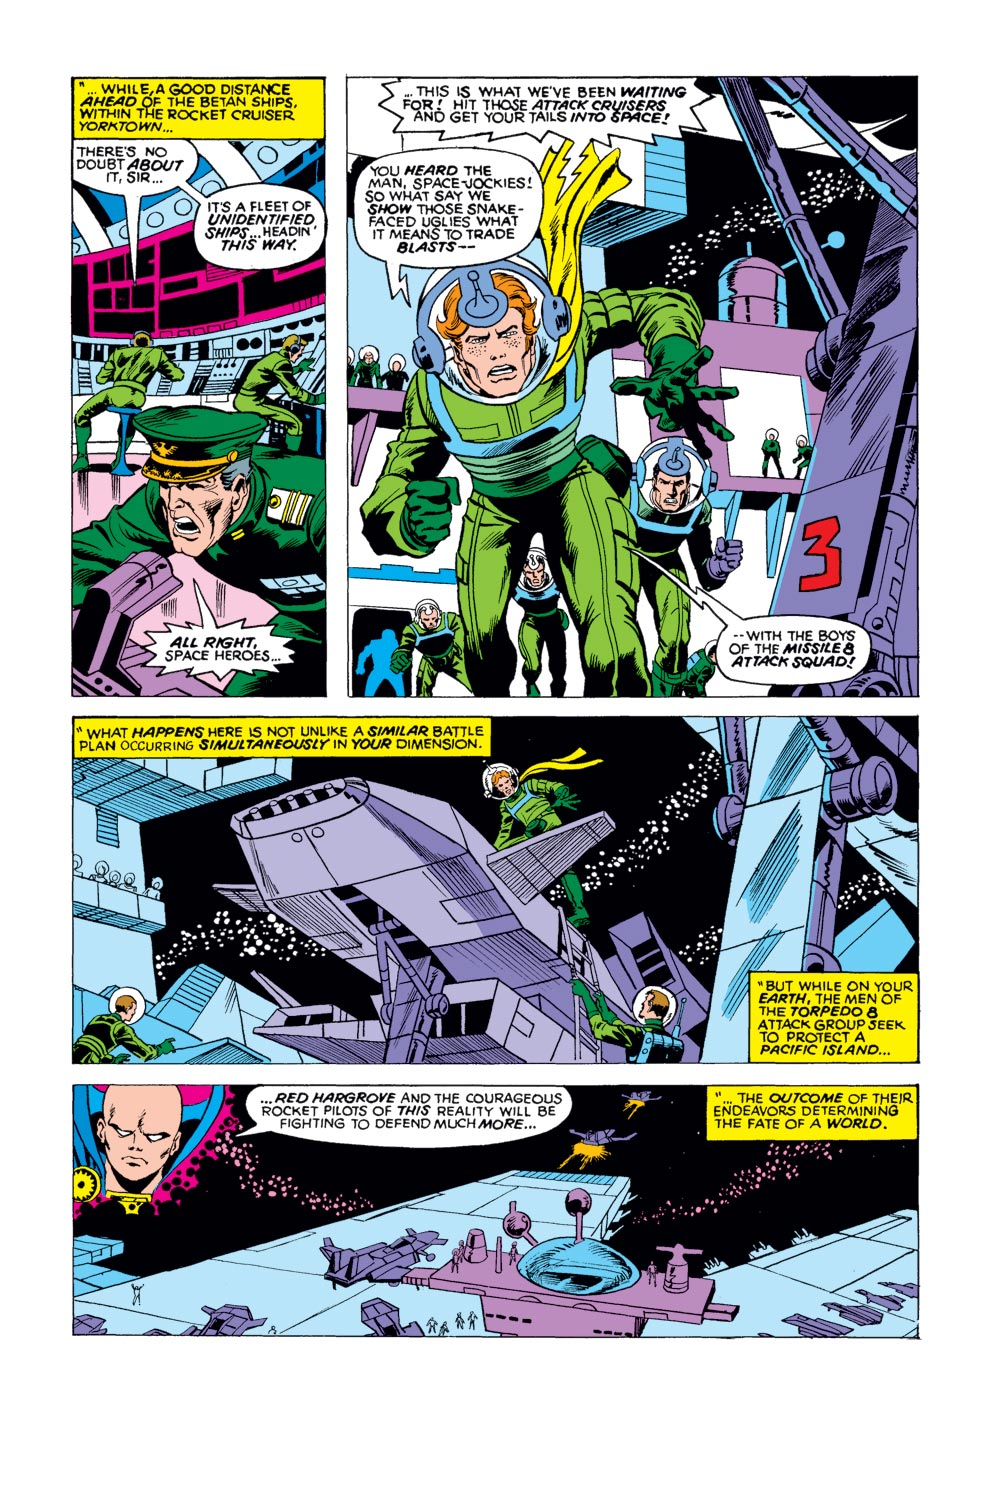 What If? (1977) issue 14 - Sgt. Fury had Fought WWII in Outer Space - Page 22